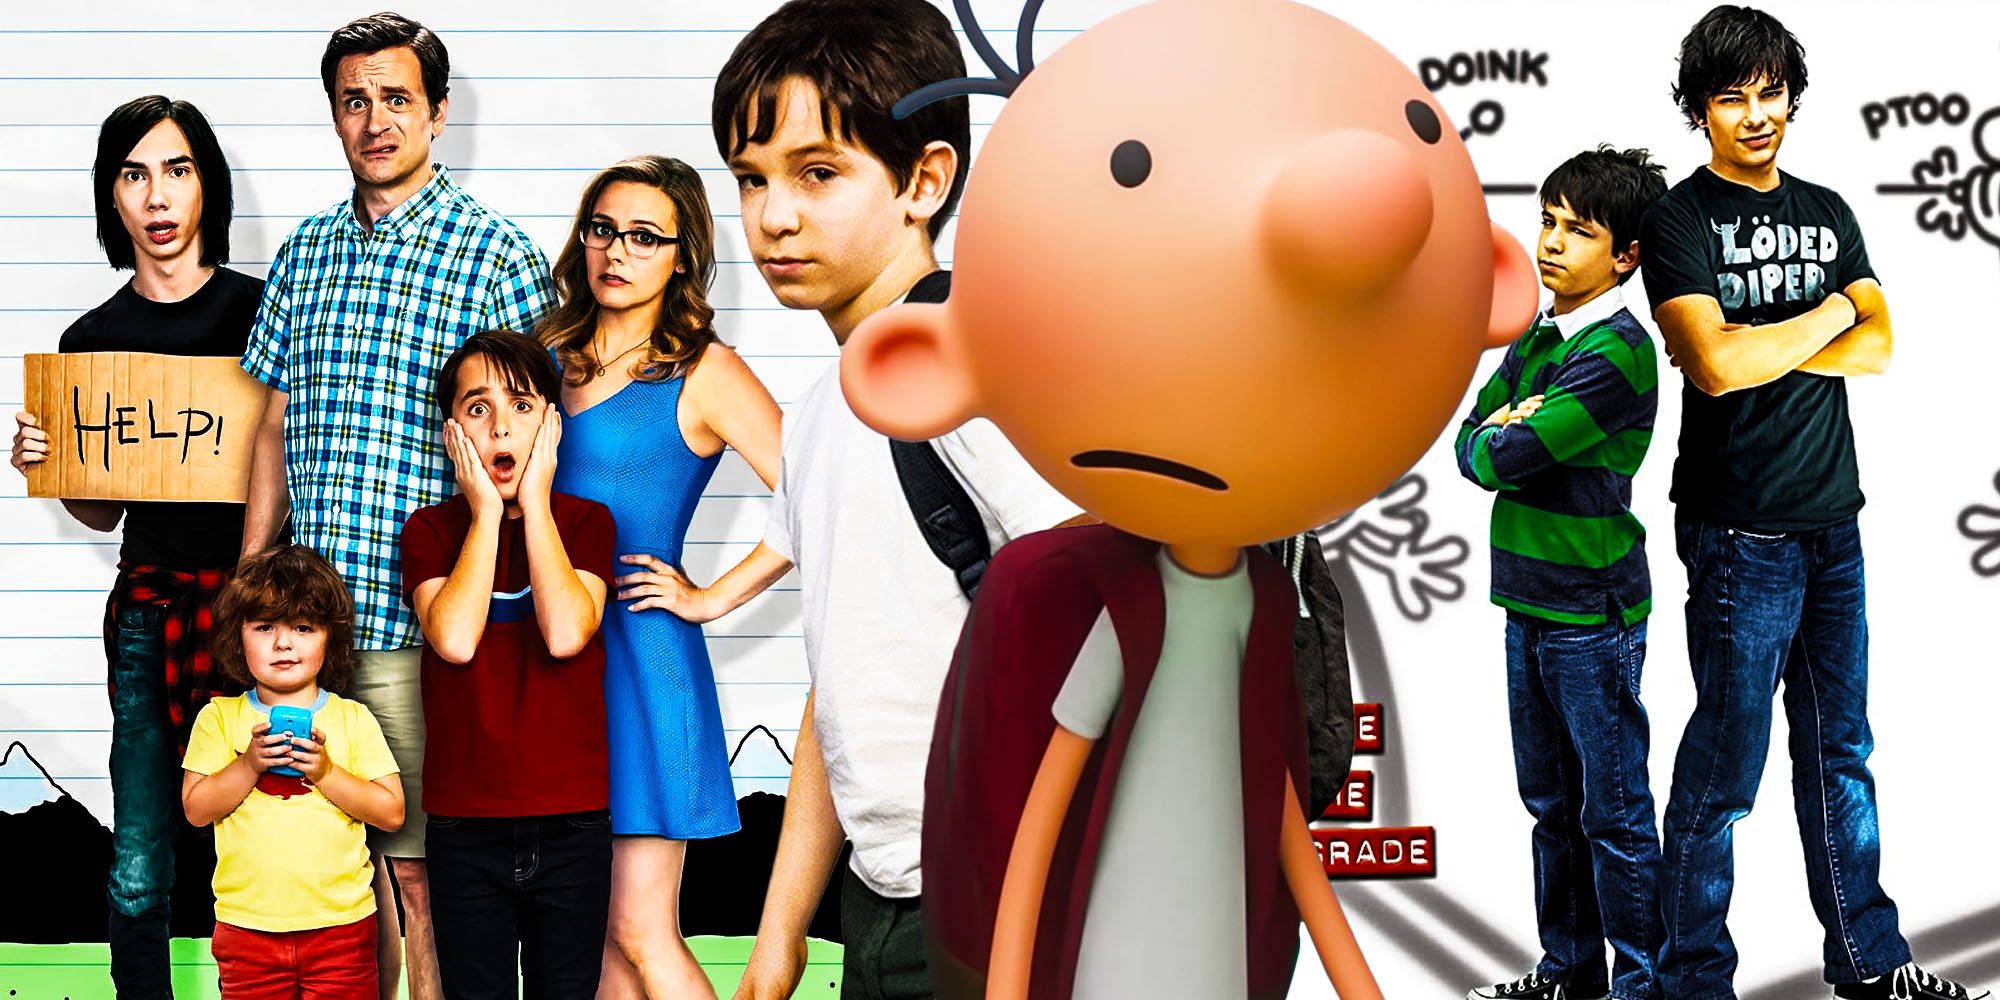 https://static1.srcdn.com/wordpress/wp-content/uploads/2021/11/diary-of-a-wimpy-kid-movies-ranked.jpg